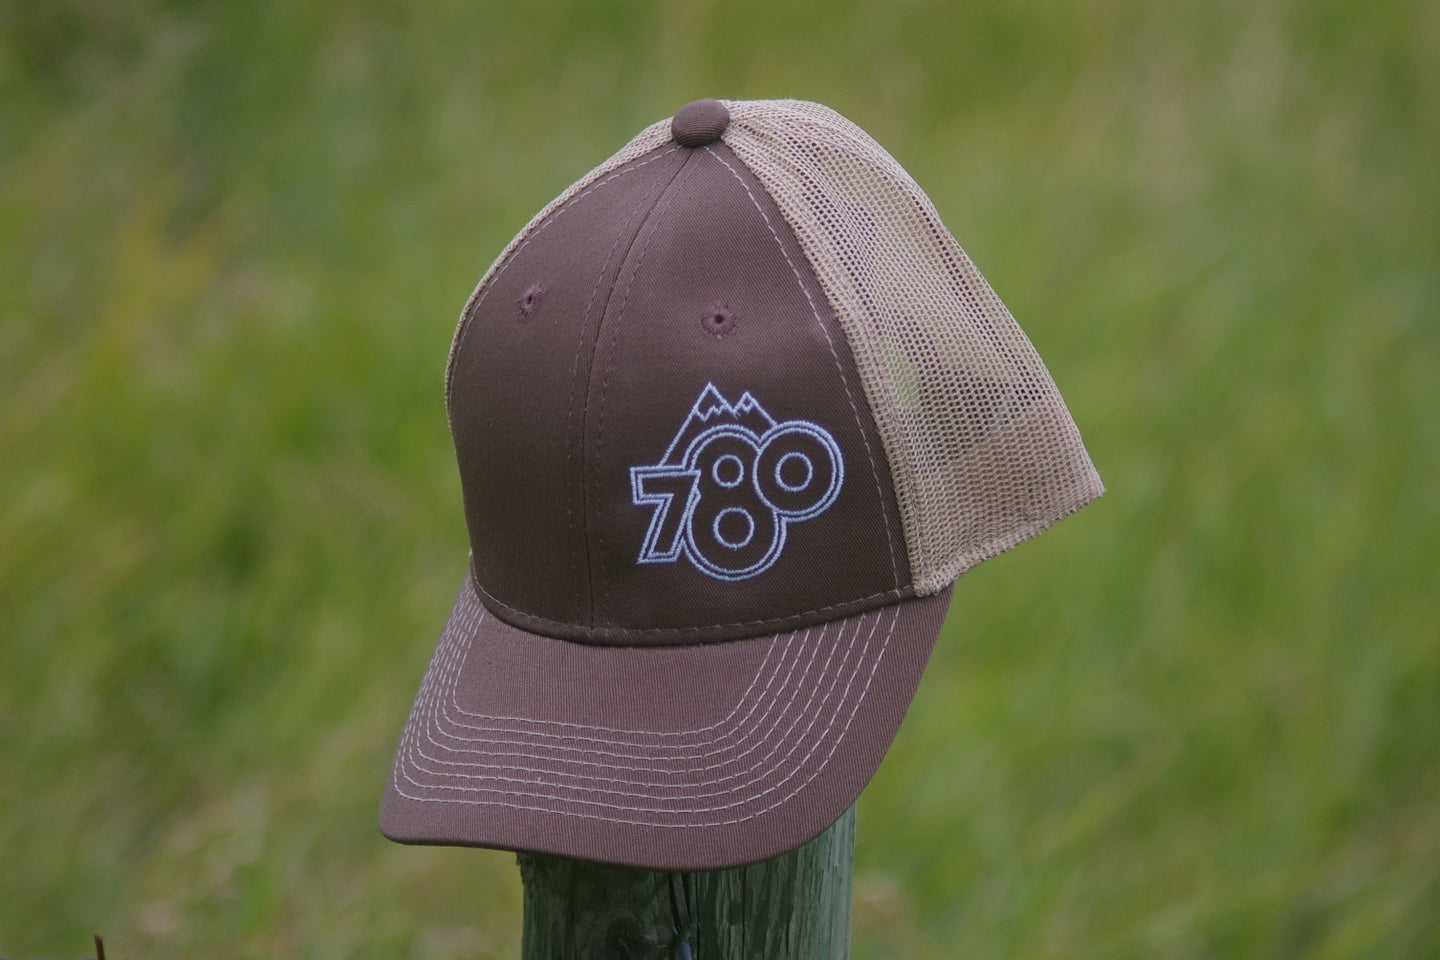 Classic 780 Clothing Company hat - Brown